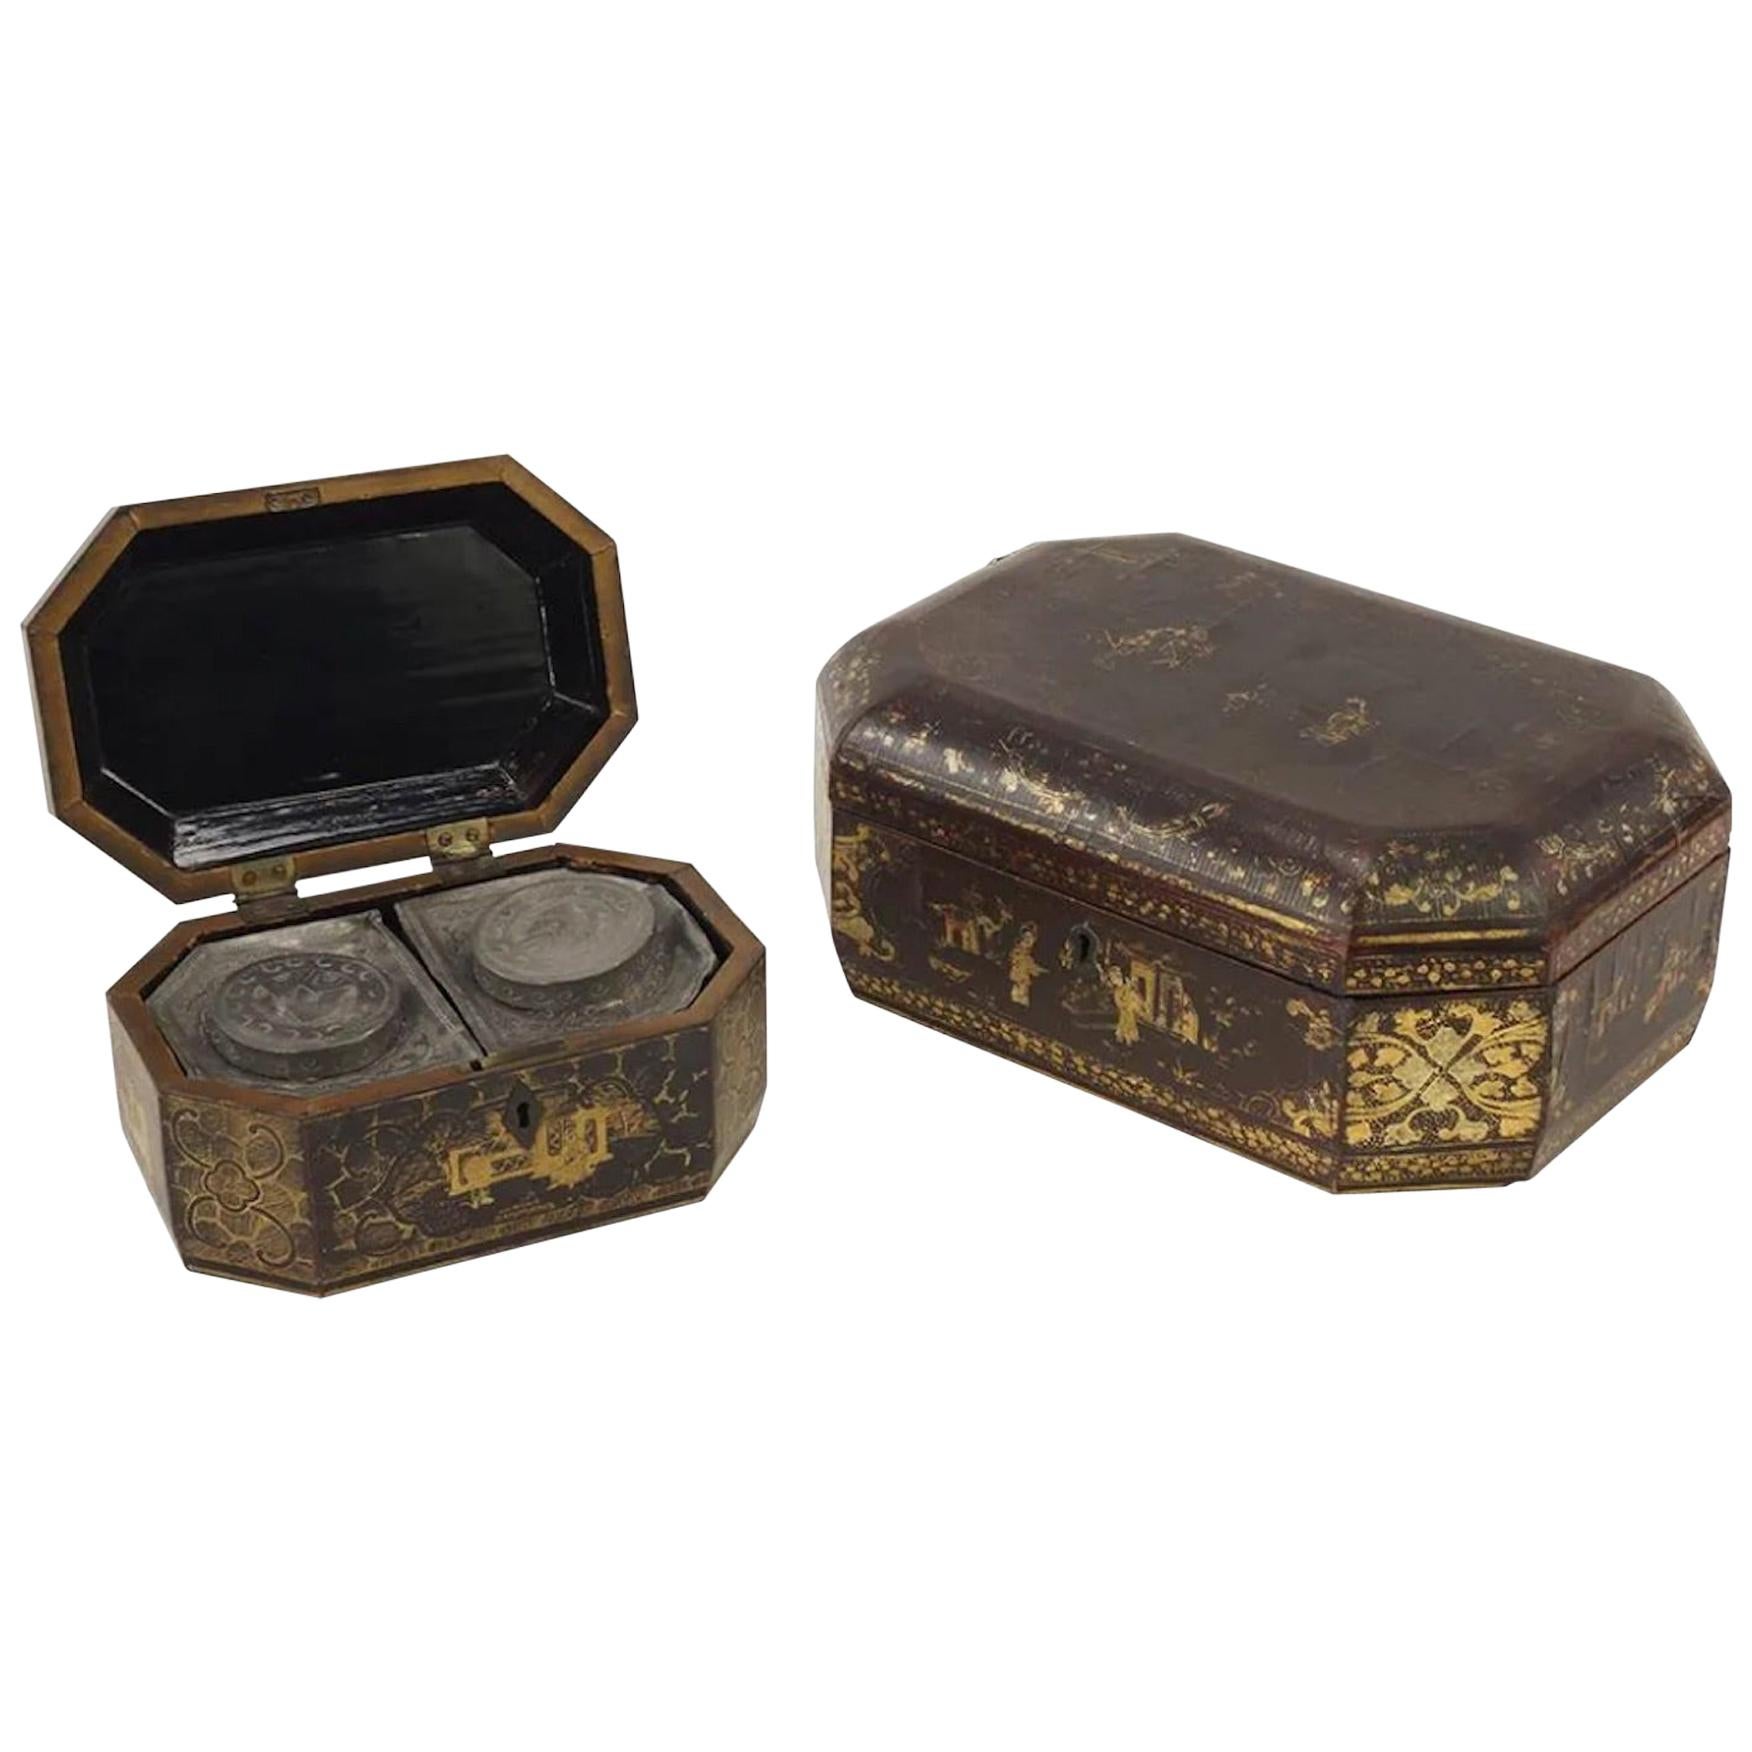 Two Chinese Export Lacquer Tea Caddy for the English Trade, Priced Per Tea Caddy